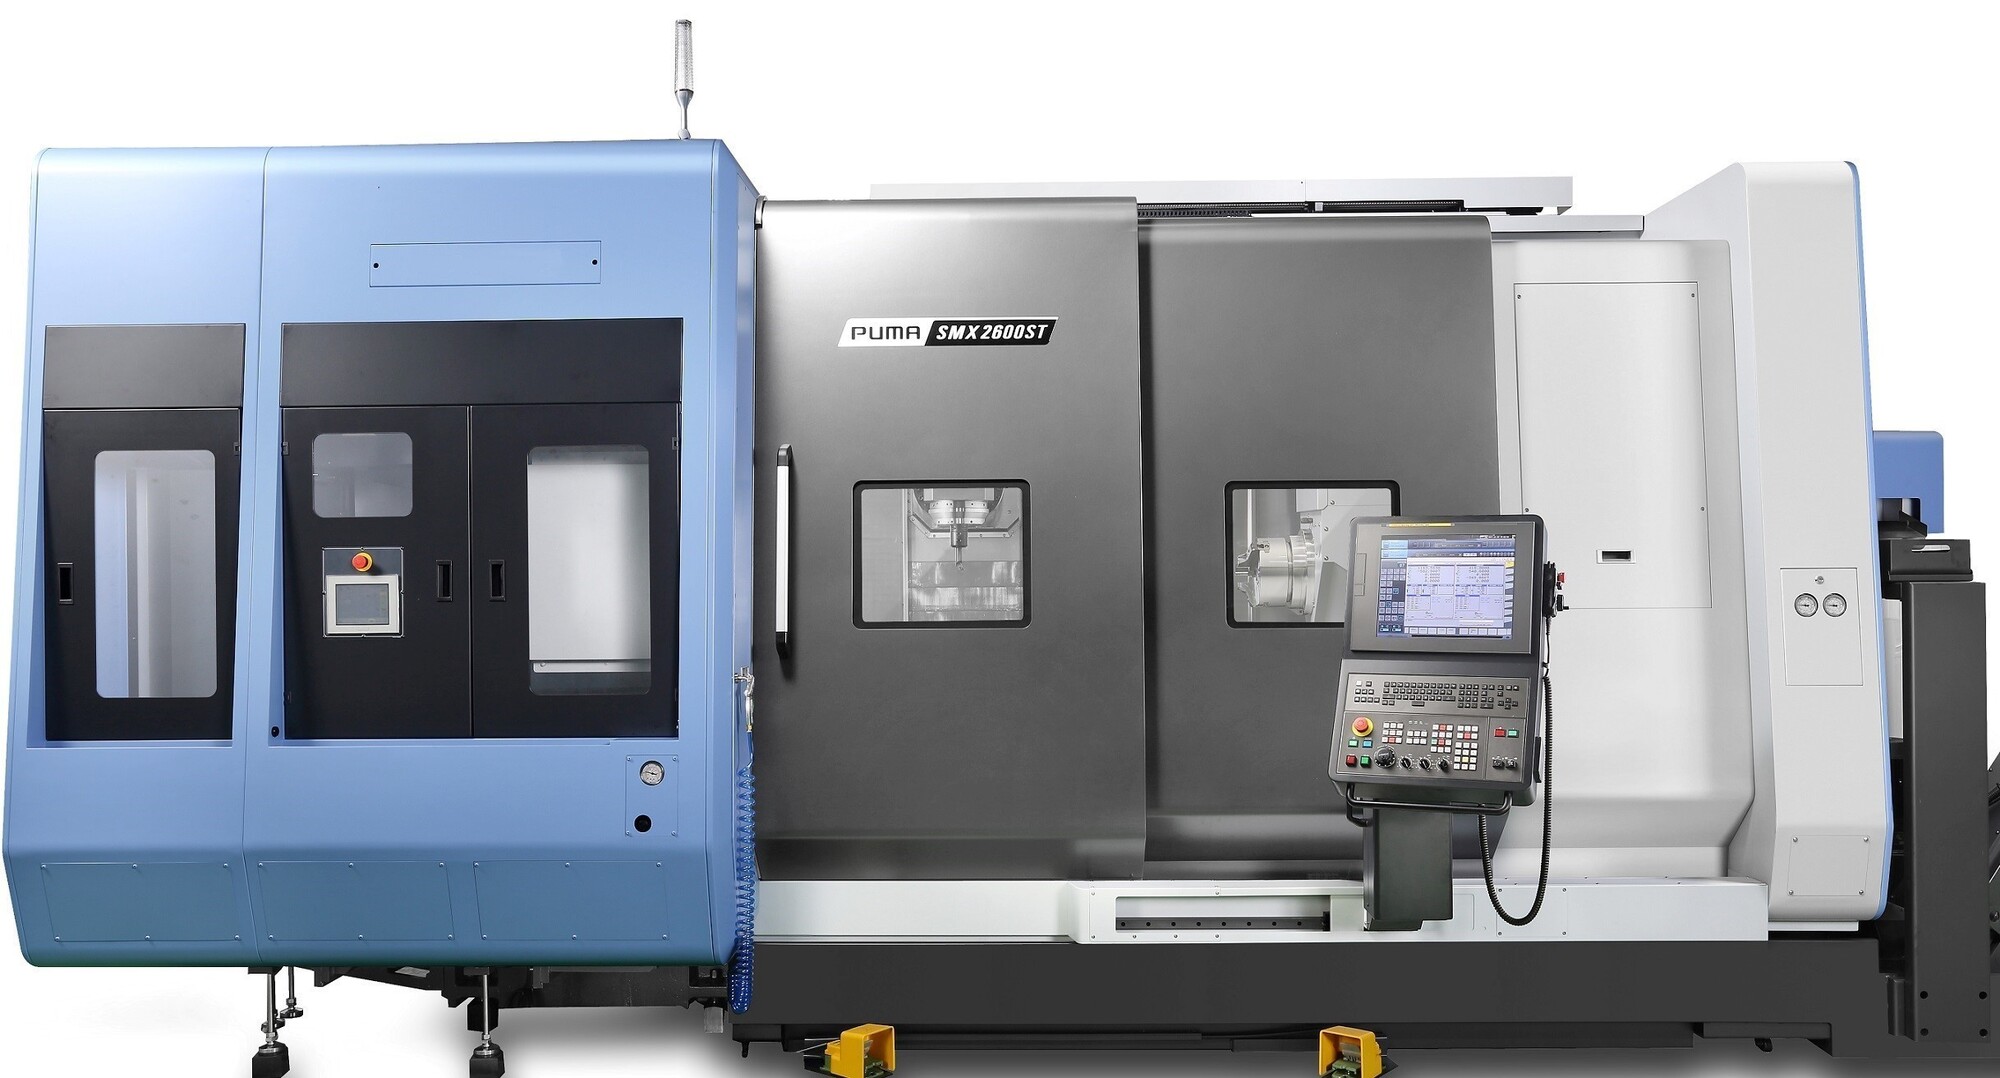 DN Solutions SMX 3100ST LMT 5-Axis or More CNC Lathes | Machine Tool Specialties